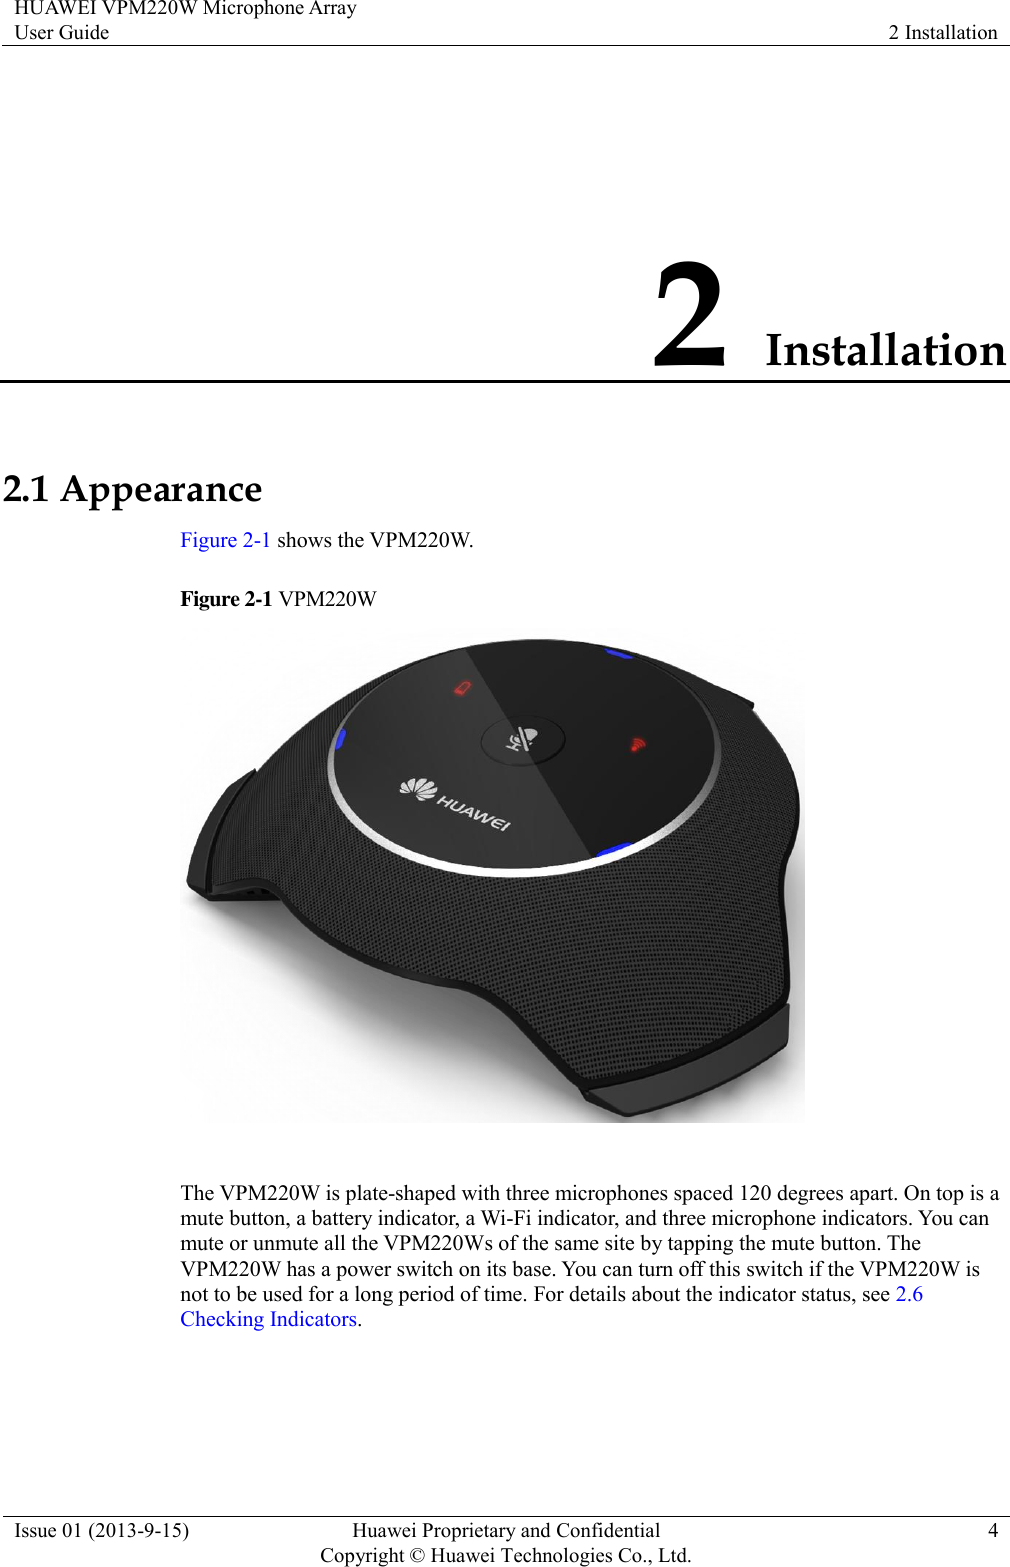 HUAWEI VPM220W Microphone Array User Guide 2 Installation  Issue 01 (2013-9-15) Huawei Proprietary and Confidential                                     Copyright © Huawei Technologies Co., Ltd. 4  2 Installation 2.1 Appearance Figure 2-1 shows the VPM220W. Figure 2-1 VPM220W   The VPM220W is plate-shaped with three microphones spaced 120 degrees apart. On top is a mute button, a battery indicator, a Wi-Fi indicator, and three microphone indicators. You can mute or unmute all the VPM220Ws of the same site by tapping the mute button. The VPM220W has a power switch on its base. You can turn off this switch if the VPM220W is not to be used for a long period of time. For details about the indicator status, see 2.6 Checking Indicators. 